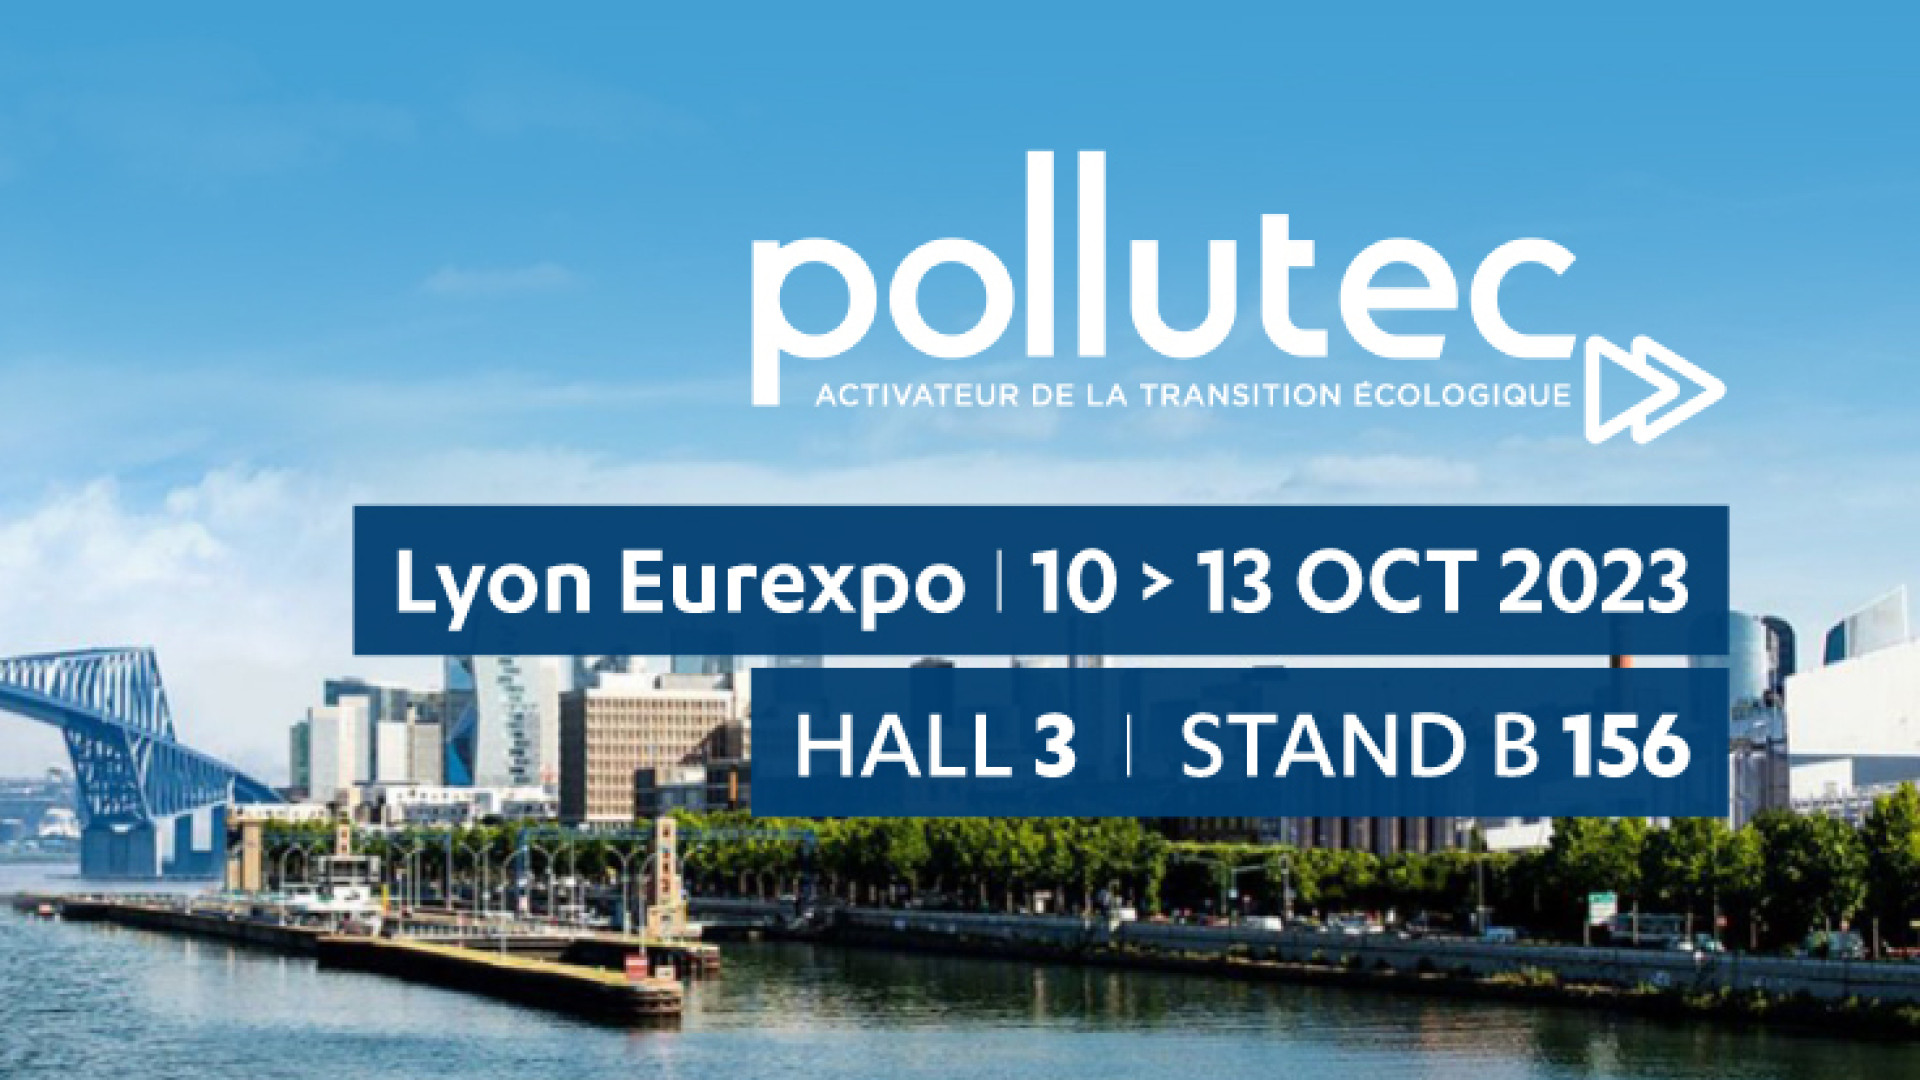 Seche Group welcomes you to Pollutec 2023